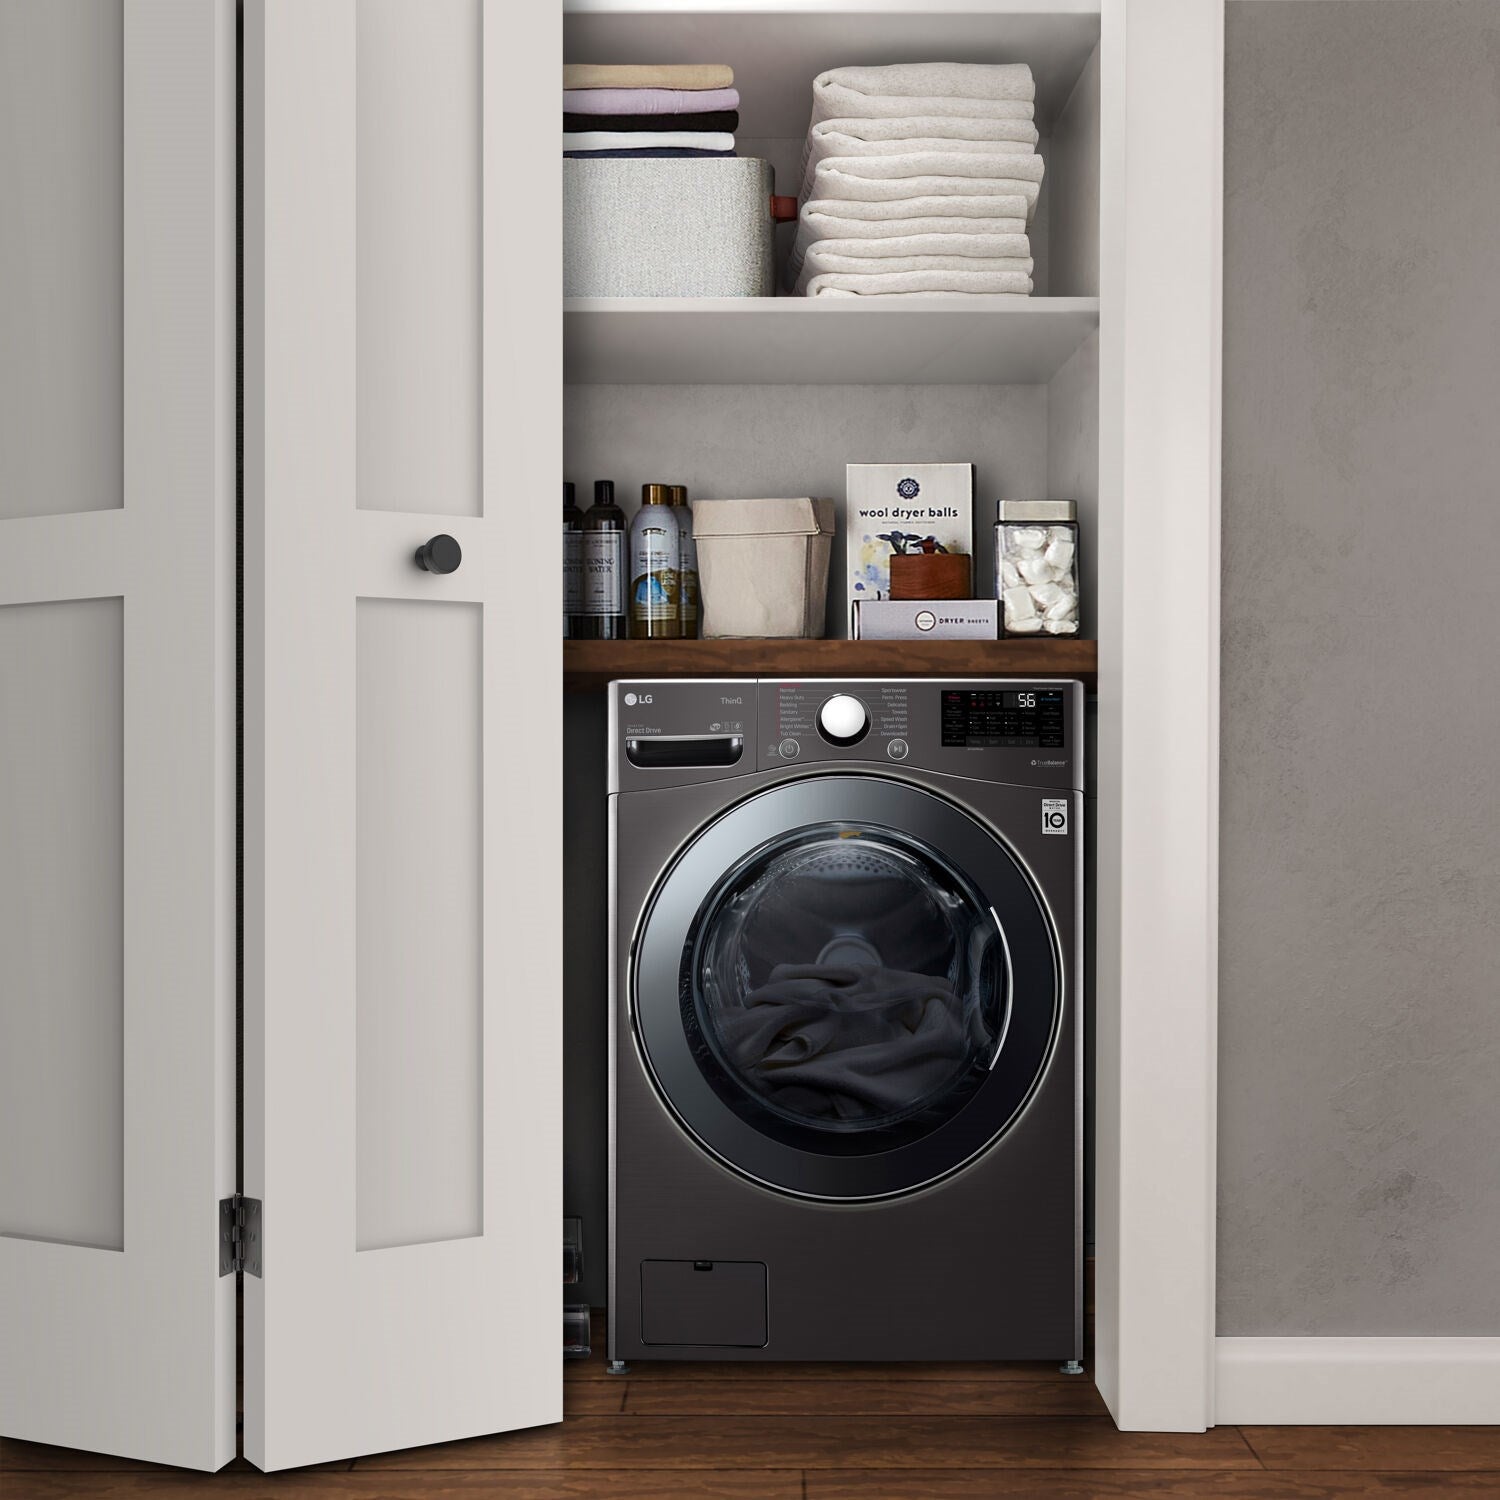 LG - 4.5 CF / 27 inch Compact All-In-One Washer/Dryer, Ventless